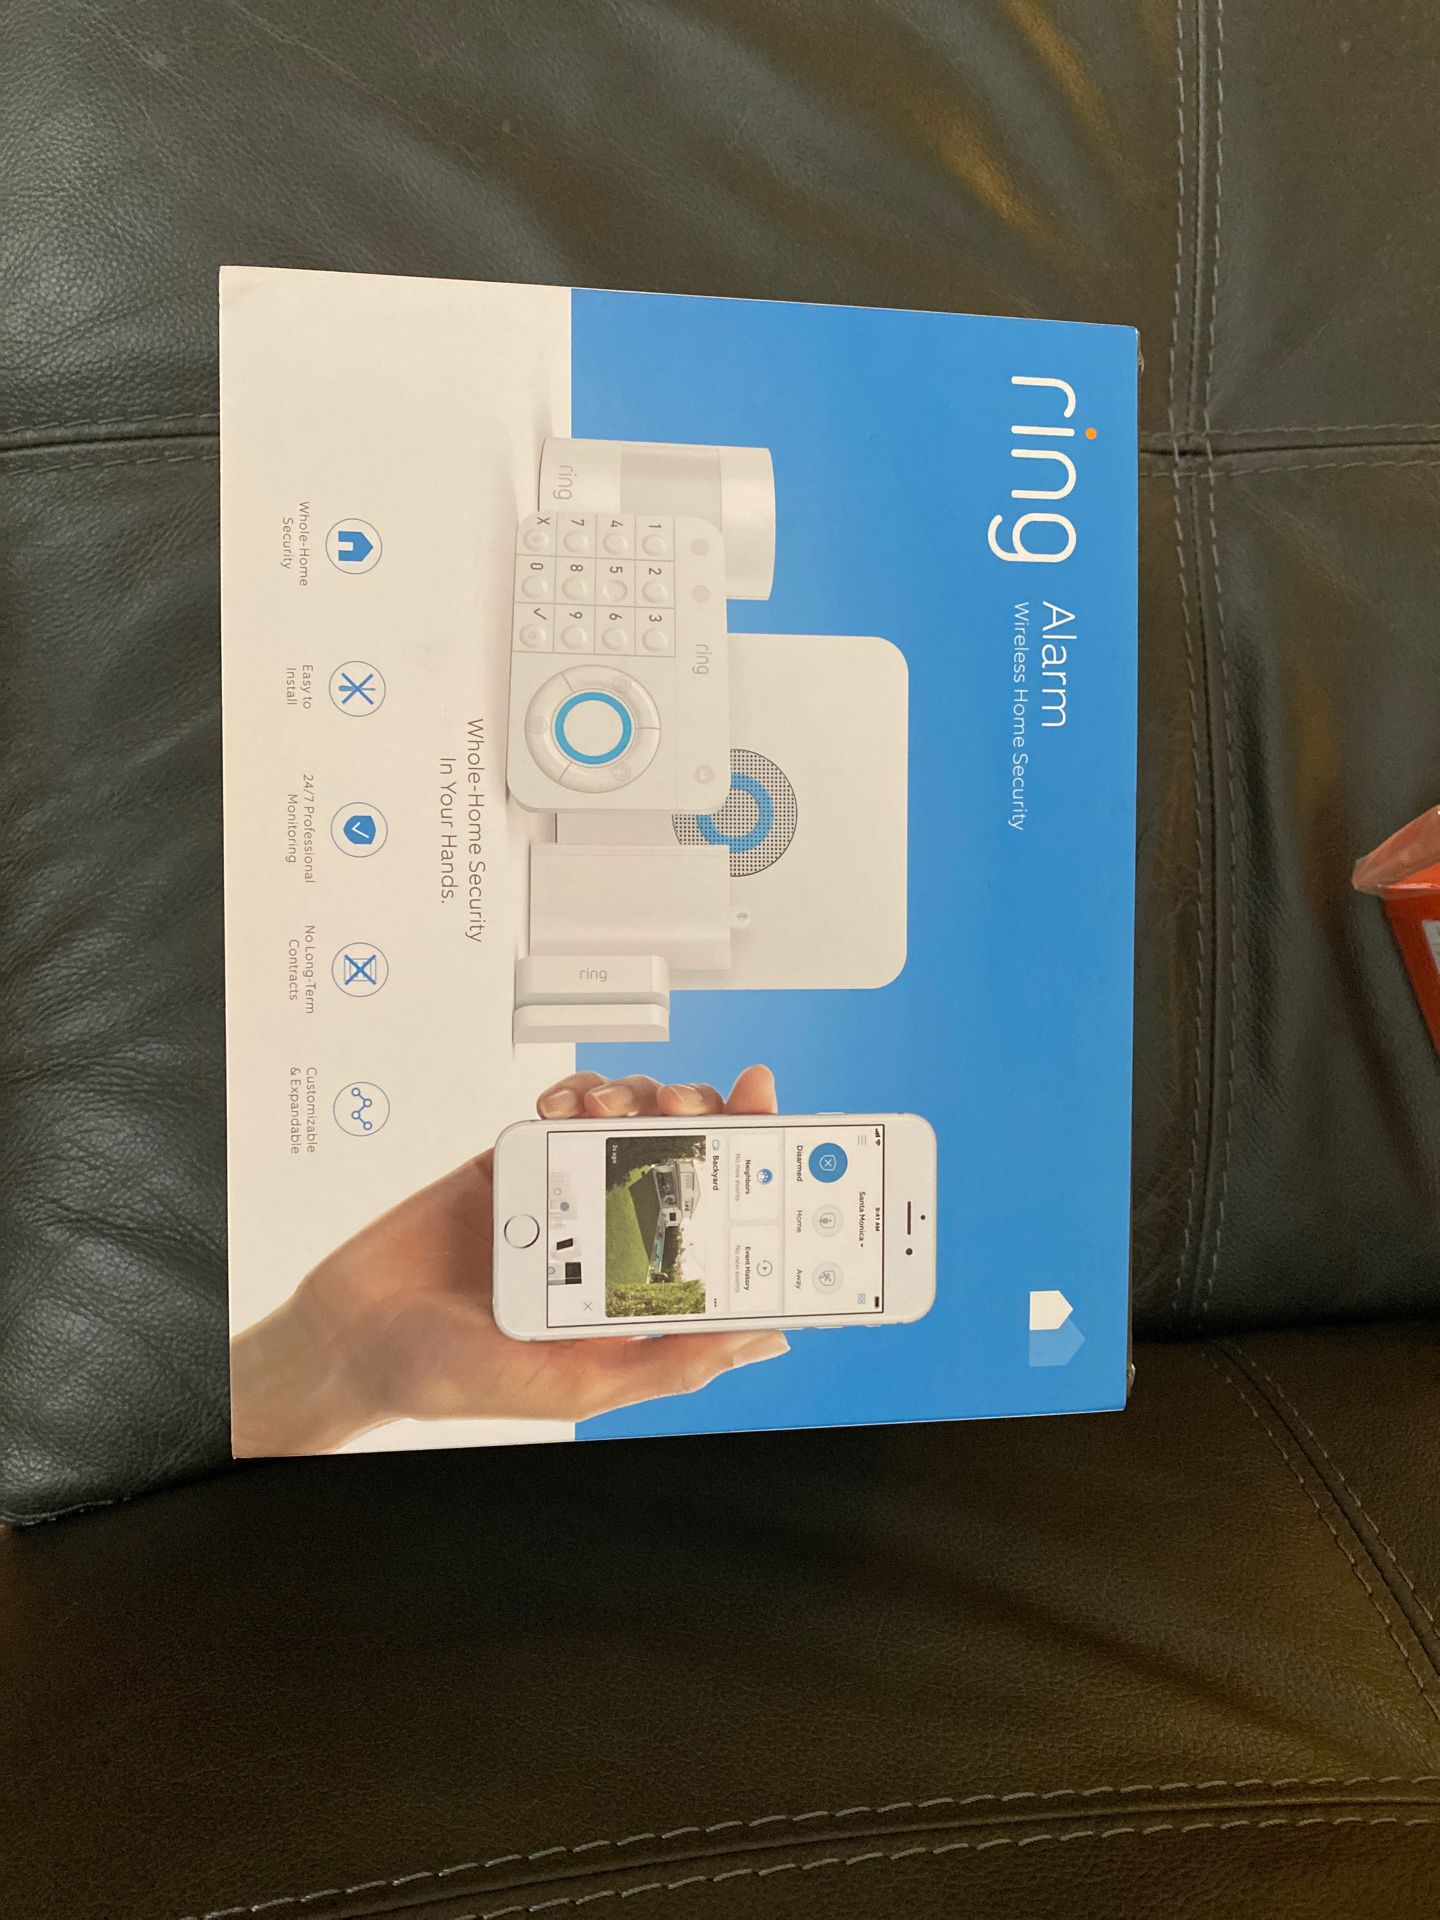 Brand new ring alarm wireless home system